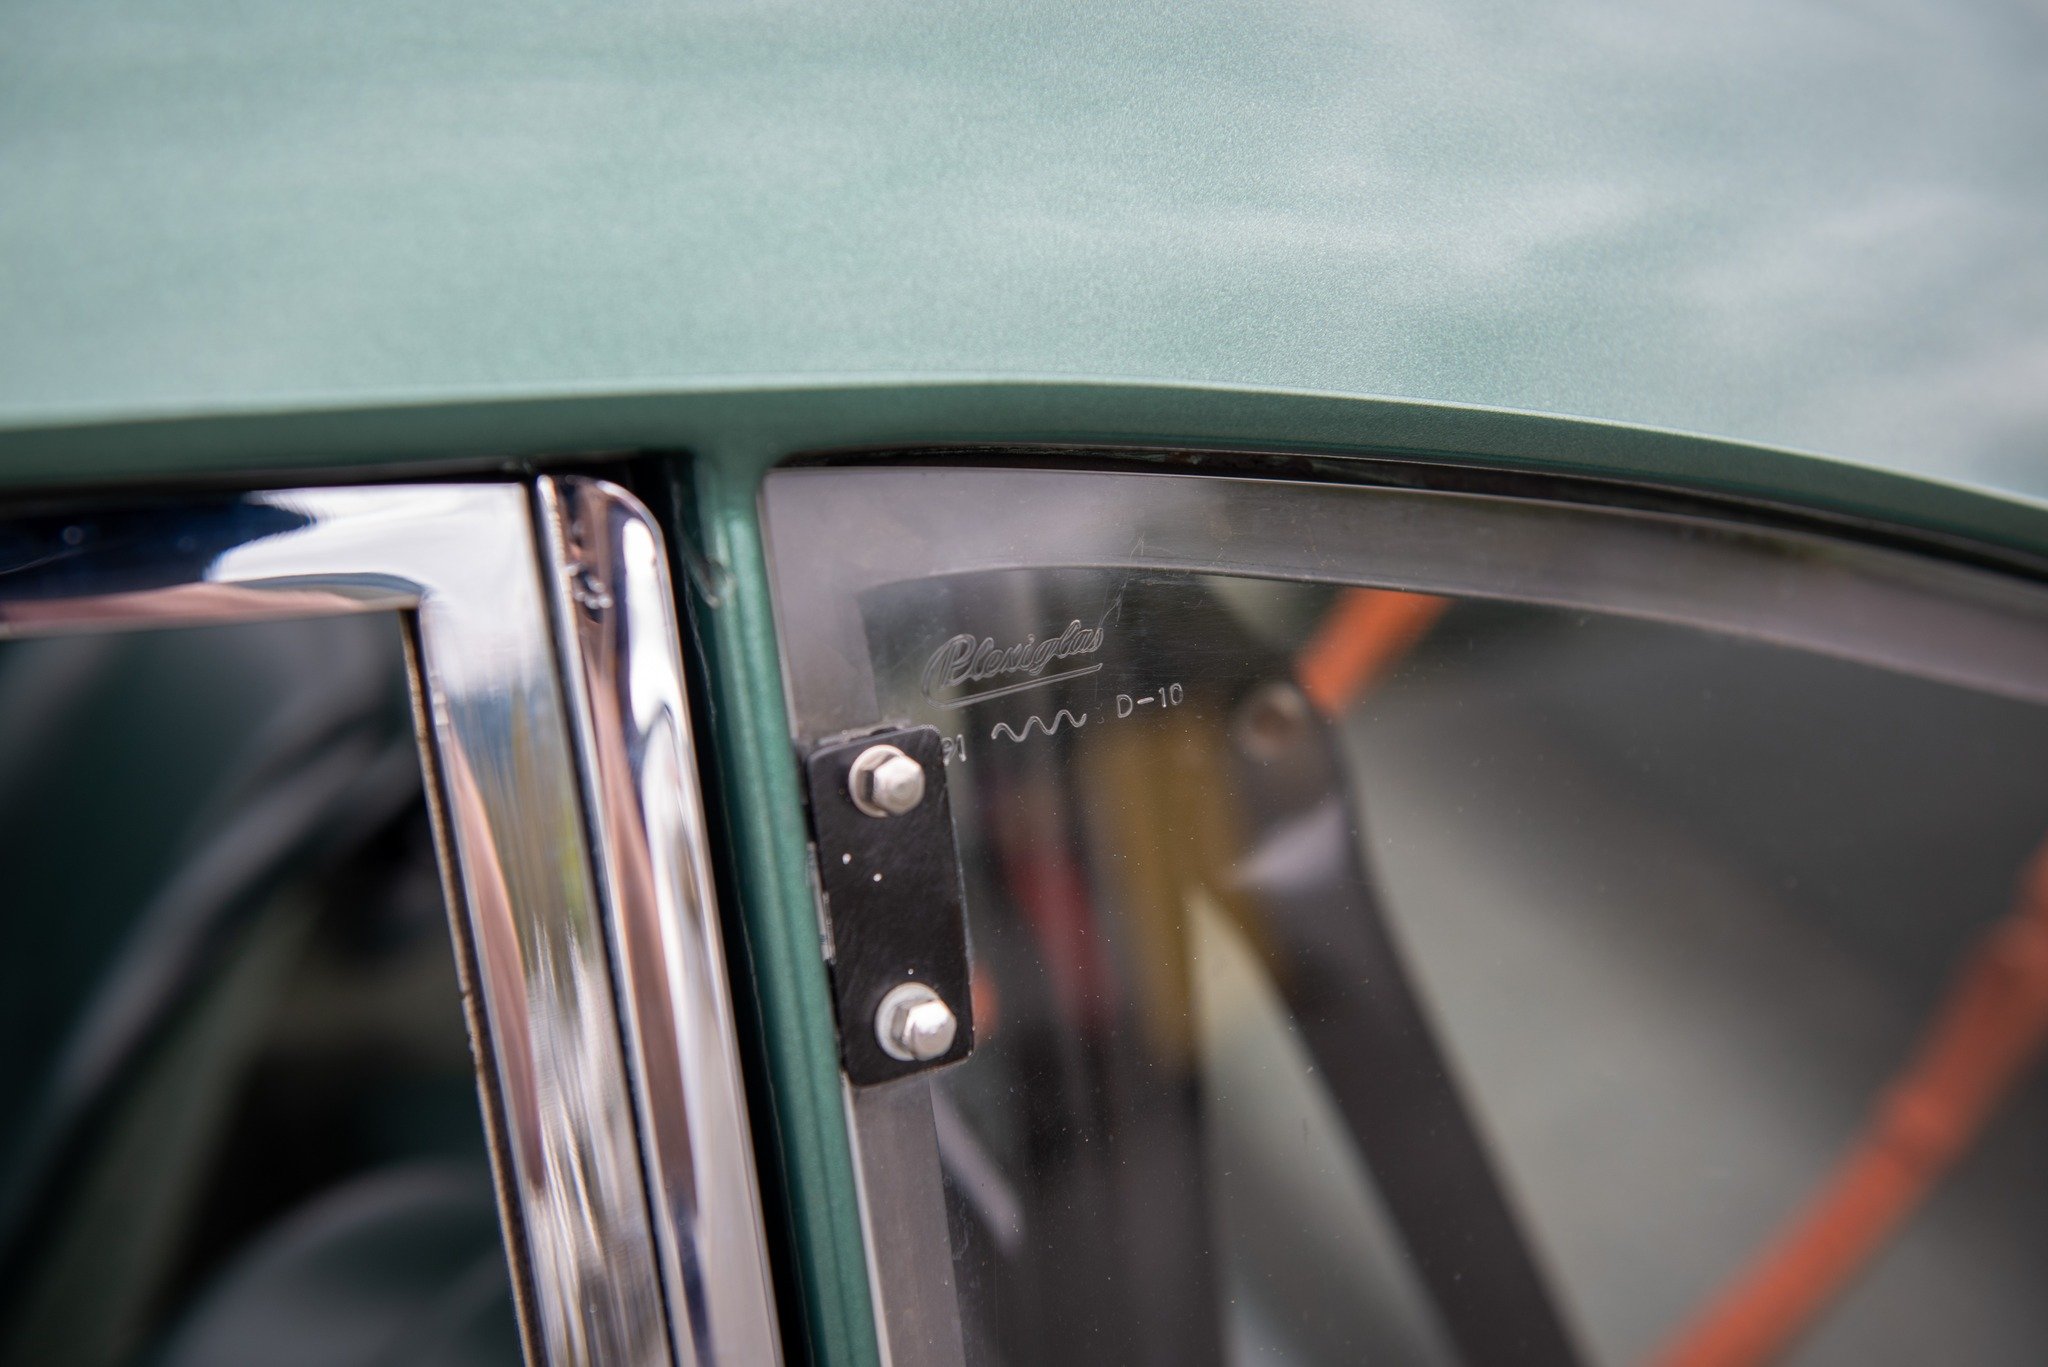 It's all in the details with our latest Porsche offering. 1956 Sunroof Coupe - a tasty 356 Outlaw. Lago Green Metallic over a green leather interior with Speedster seats, Plexiglas windows, lots of GT details and a big bore motor. Super fun, launchin